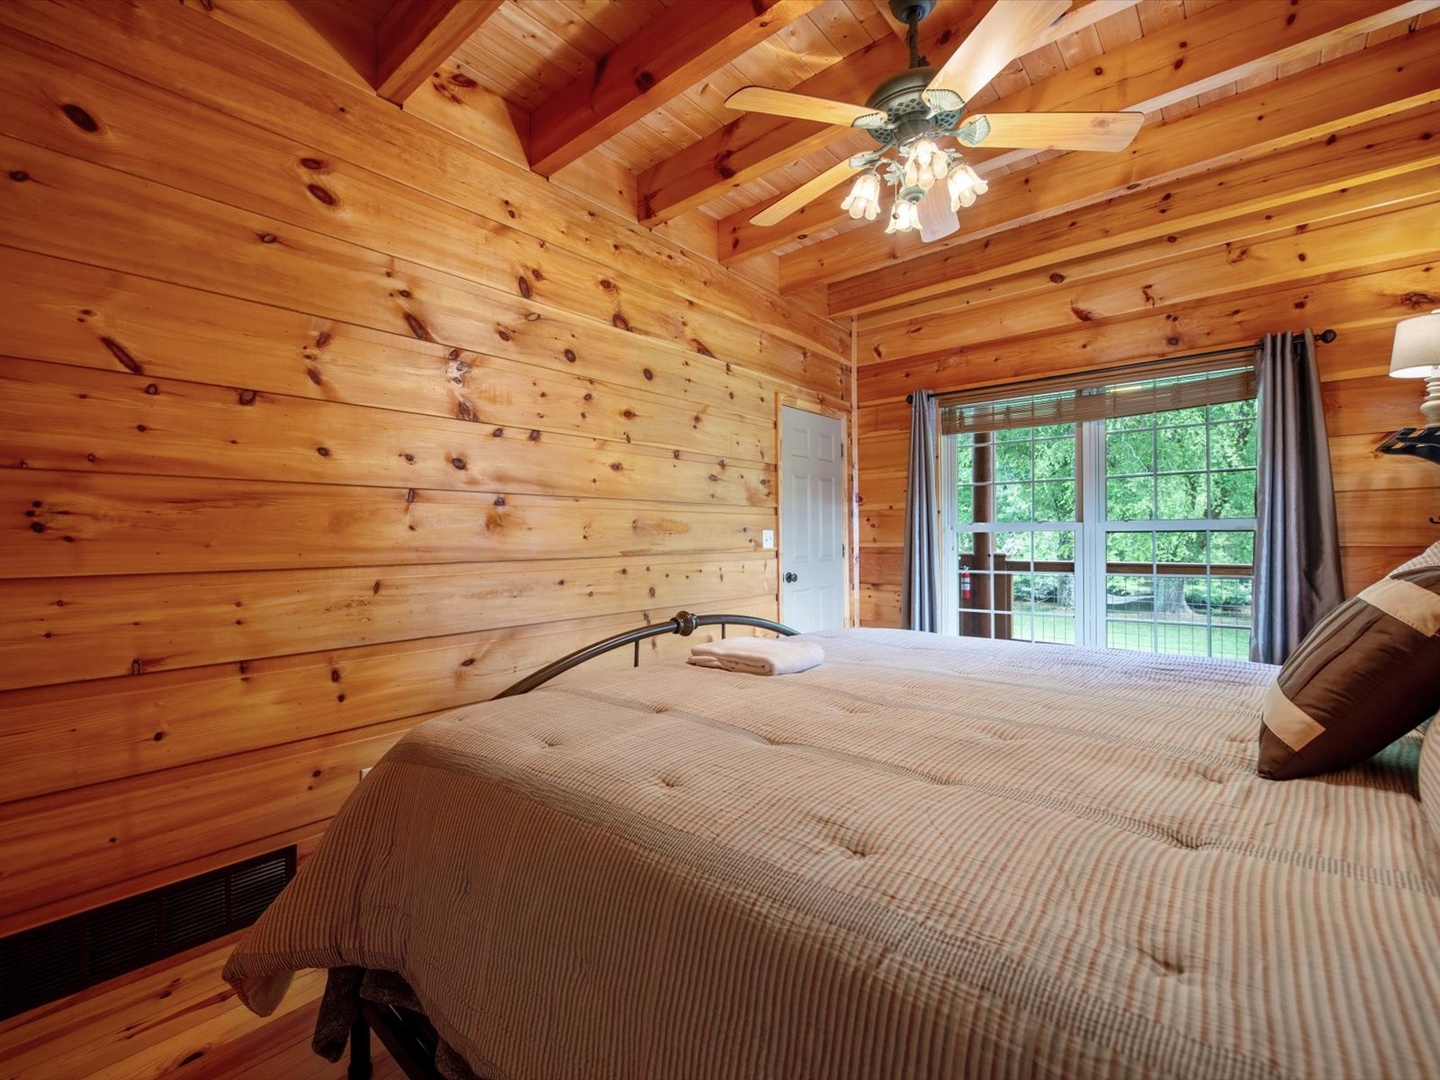 Take Me to the River -Entry Level Master Bedroom